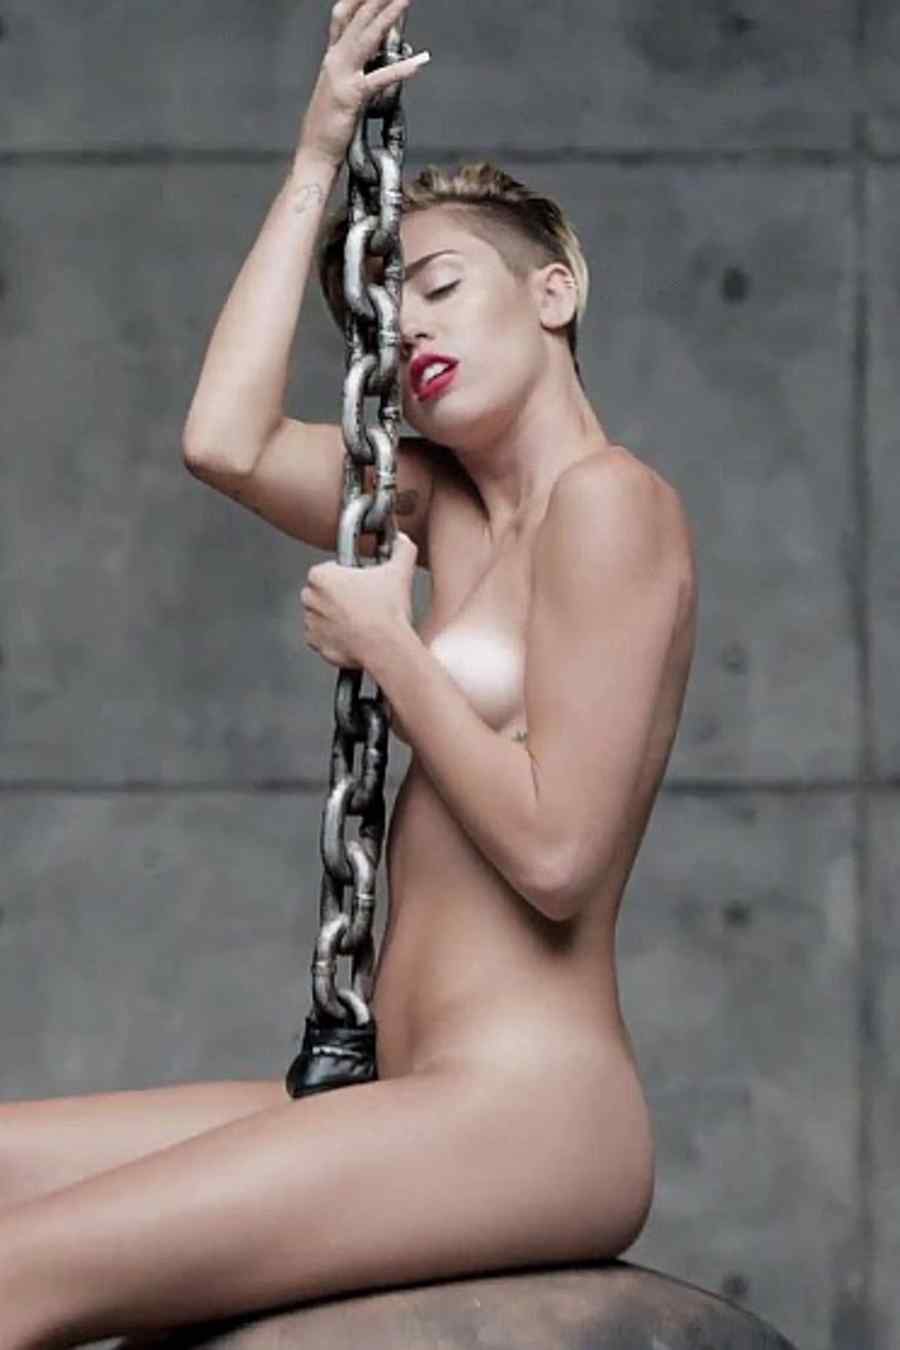 Miley Cyrus in the music video for Wrecking Ball